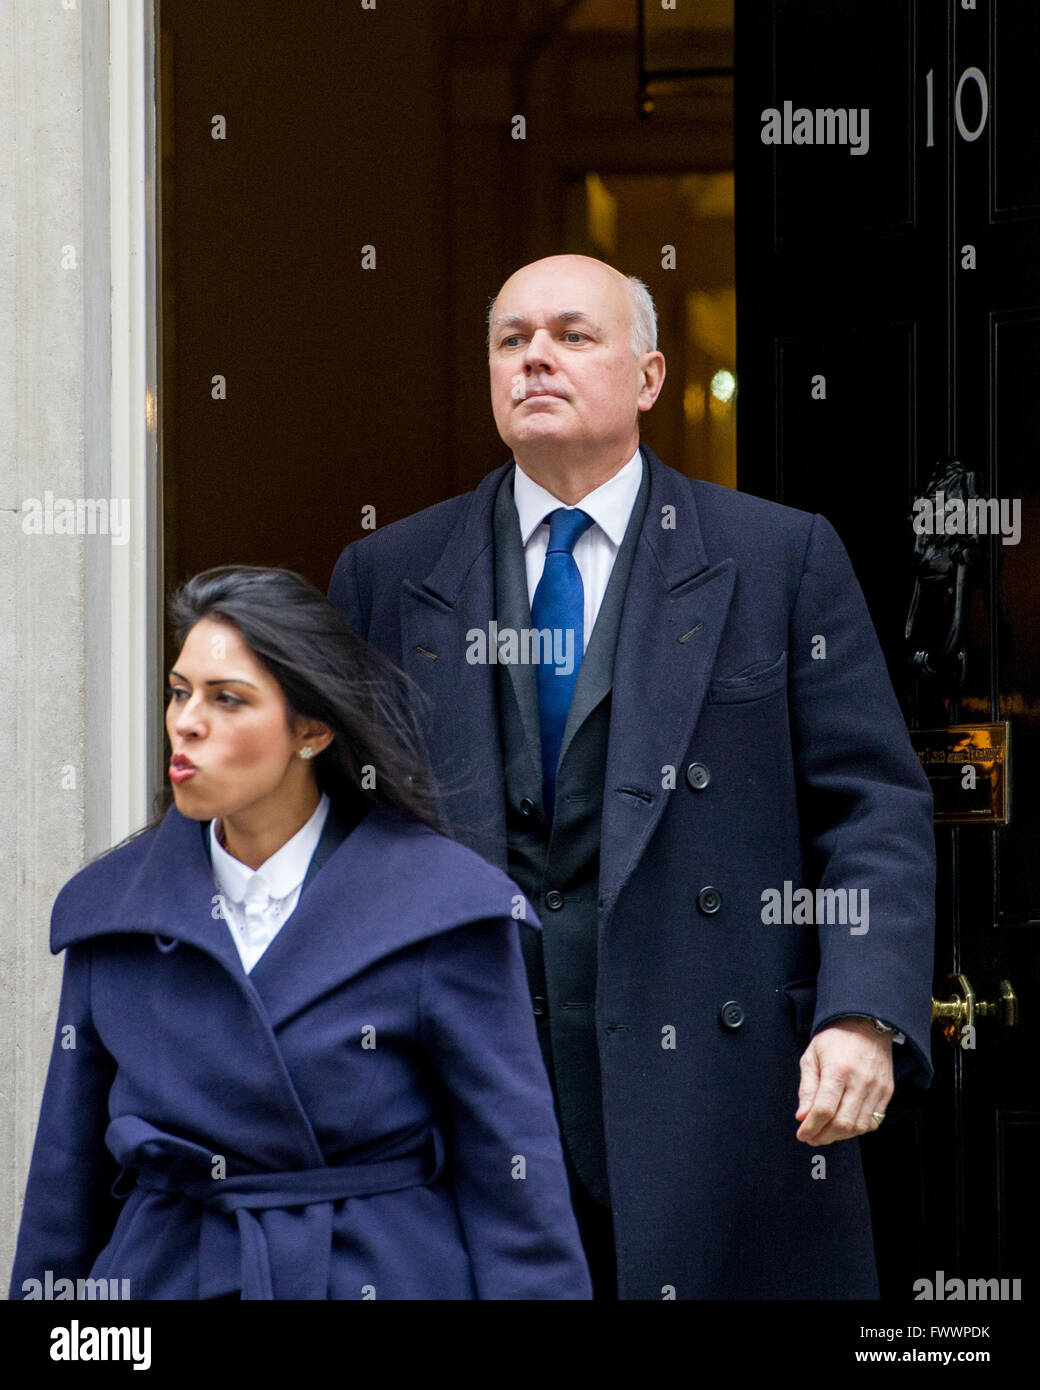 Cabinet Ministers and Members of Parliament arriving and departing the weekly Cabinet Meeting in Downing Street.  Featuring: Priti Patel MP, Minister of State for Employment and Iain Duncan Smith MP, Secretary of State for Work and Pensions Where: London, Stock Photo